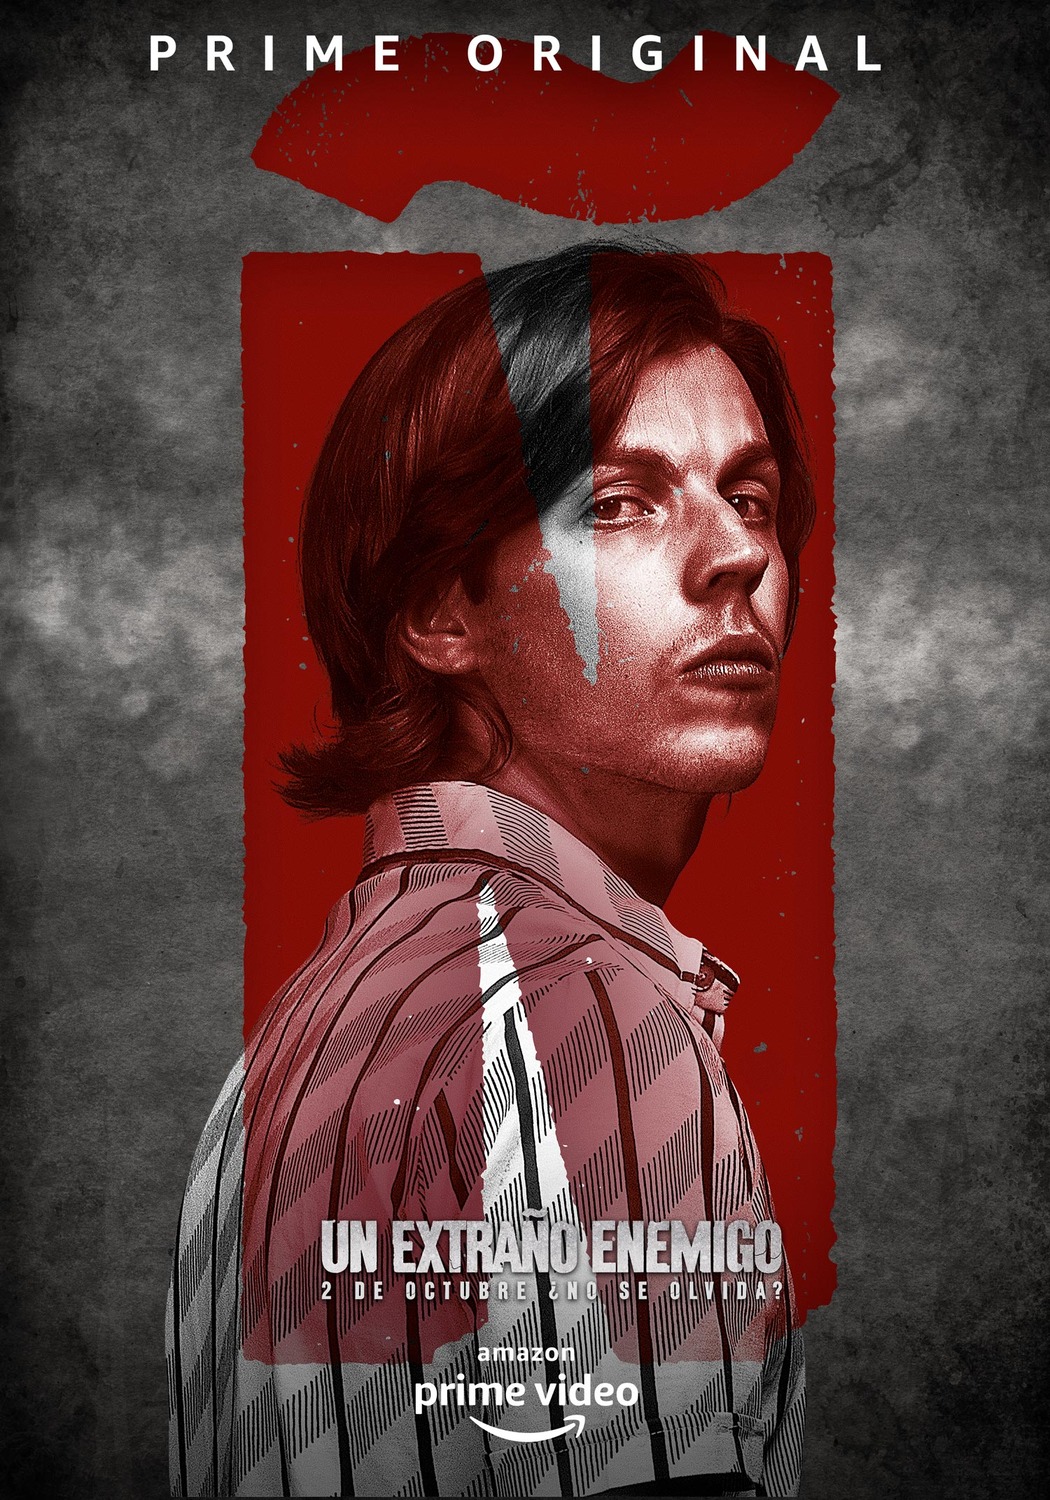 Extra Large TV Poster Image for Un extraño enemigo (#10 of 26)